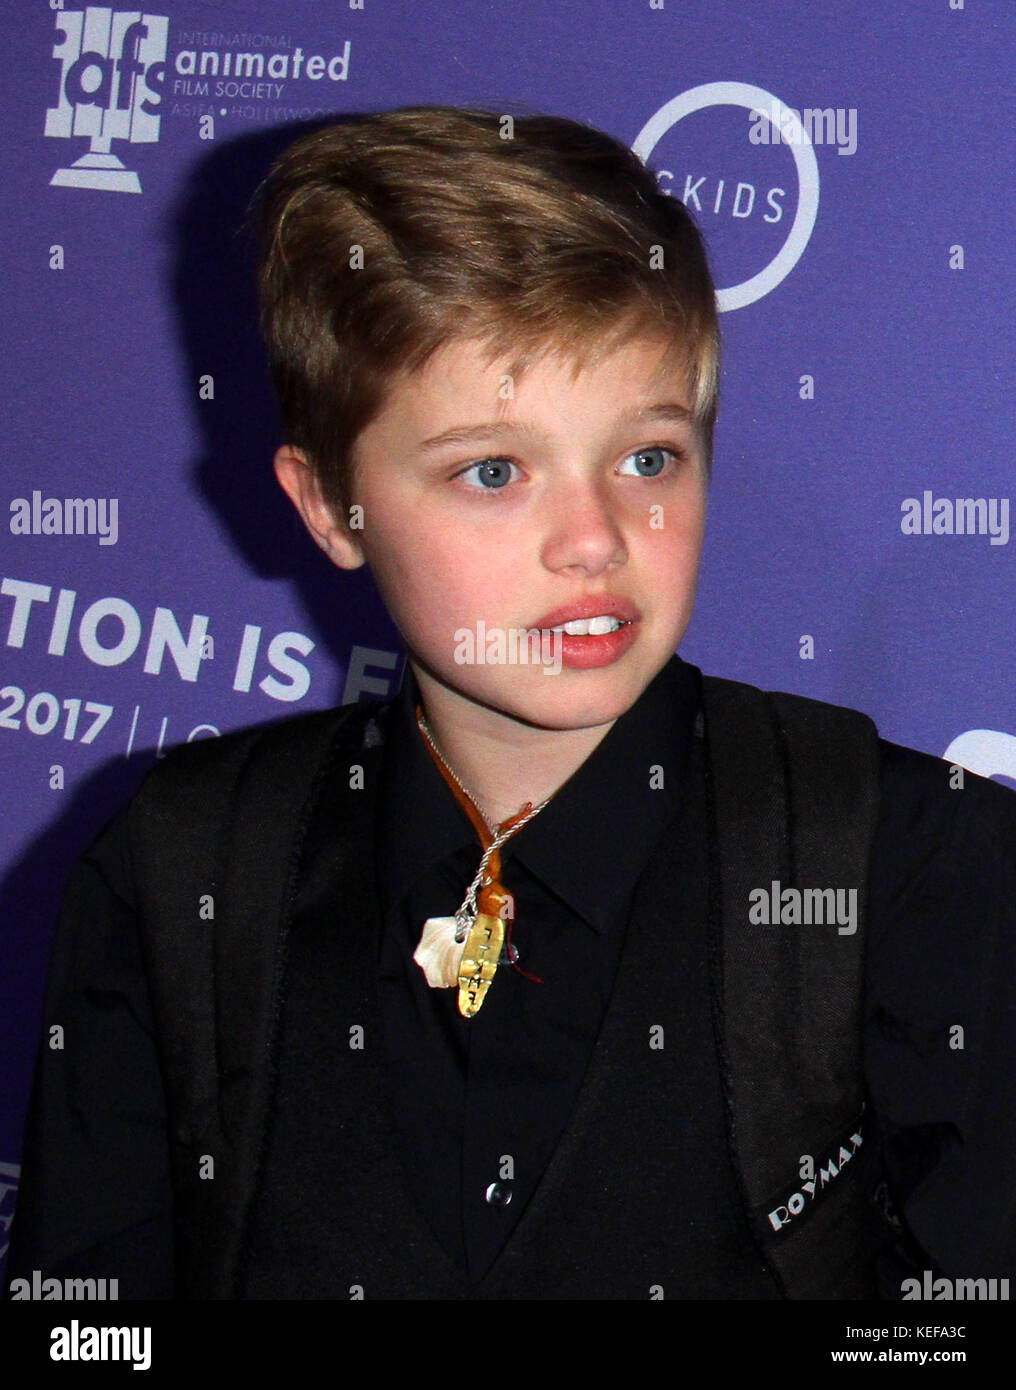 Hollywood, CA, USA. 20th Oct, 2017. Shiloh Jolie-Pitt. 'The Breadwinner'' U.S. Premiere held at the TCL Chinese 6 Theatre in Hollywood. Photo Credit: AdMedia Credit: AdMedia/ZUMA Wire/Alamy Live News Stock Photo